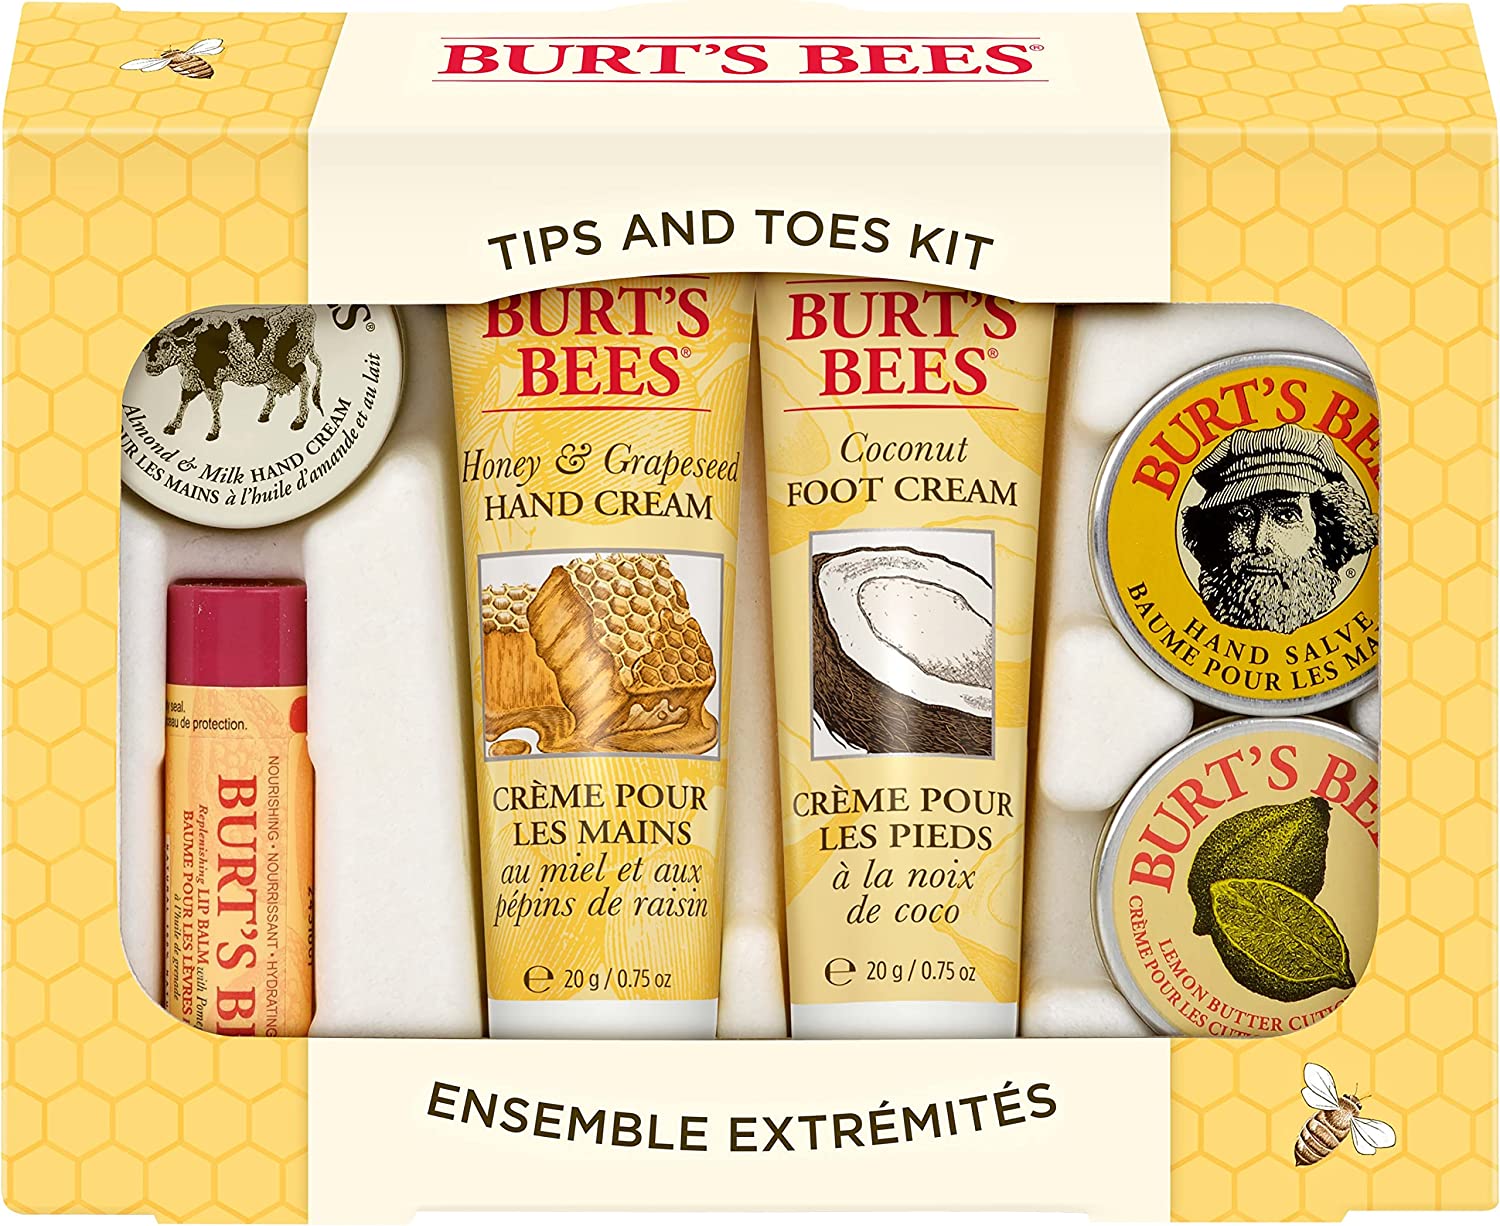 Burt’s Bees Gifts, 6 Body Care Products, Tips and Toes Set – Moisturizing Lip Balm, 2 Hand Creams, Foot Cream, Cuticle Cream & Hand Salve